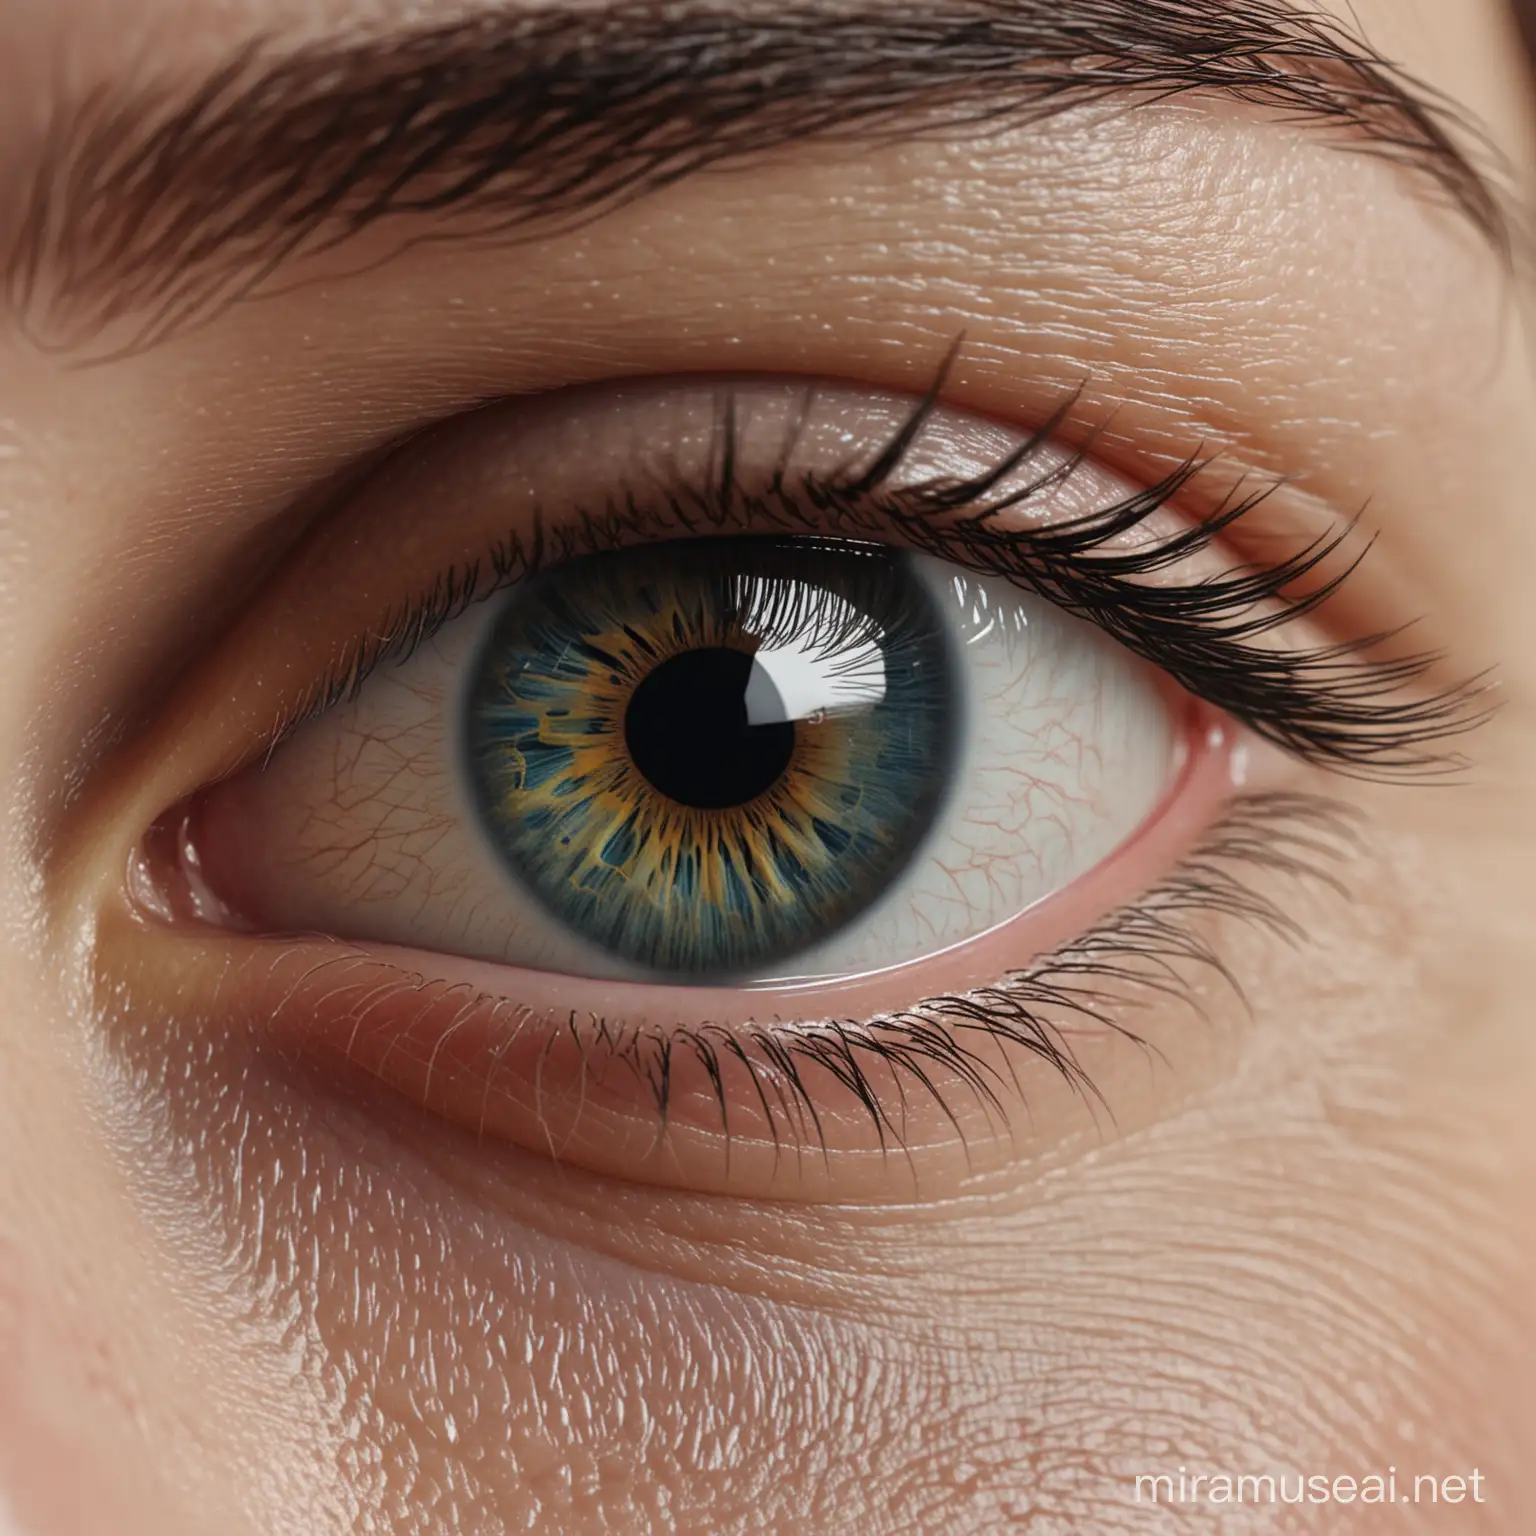 a close up detail of an eye looking at the camera. reflection of may people, 
hyper realistic, 8k